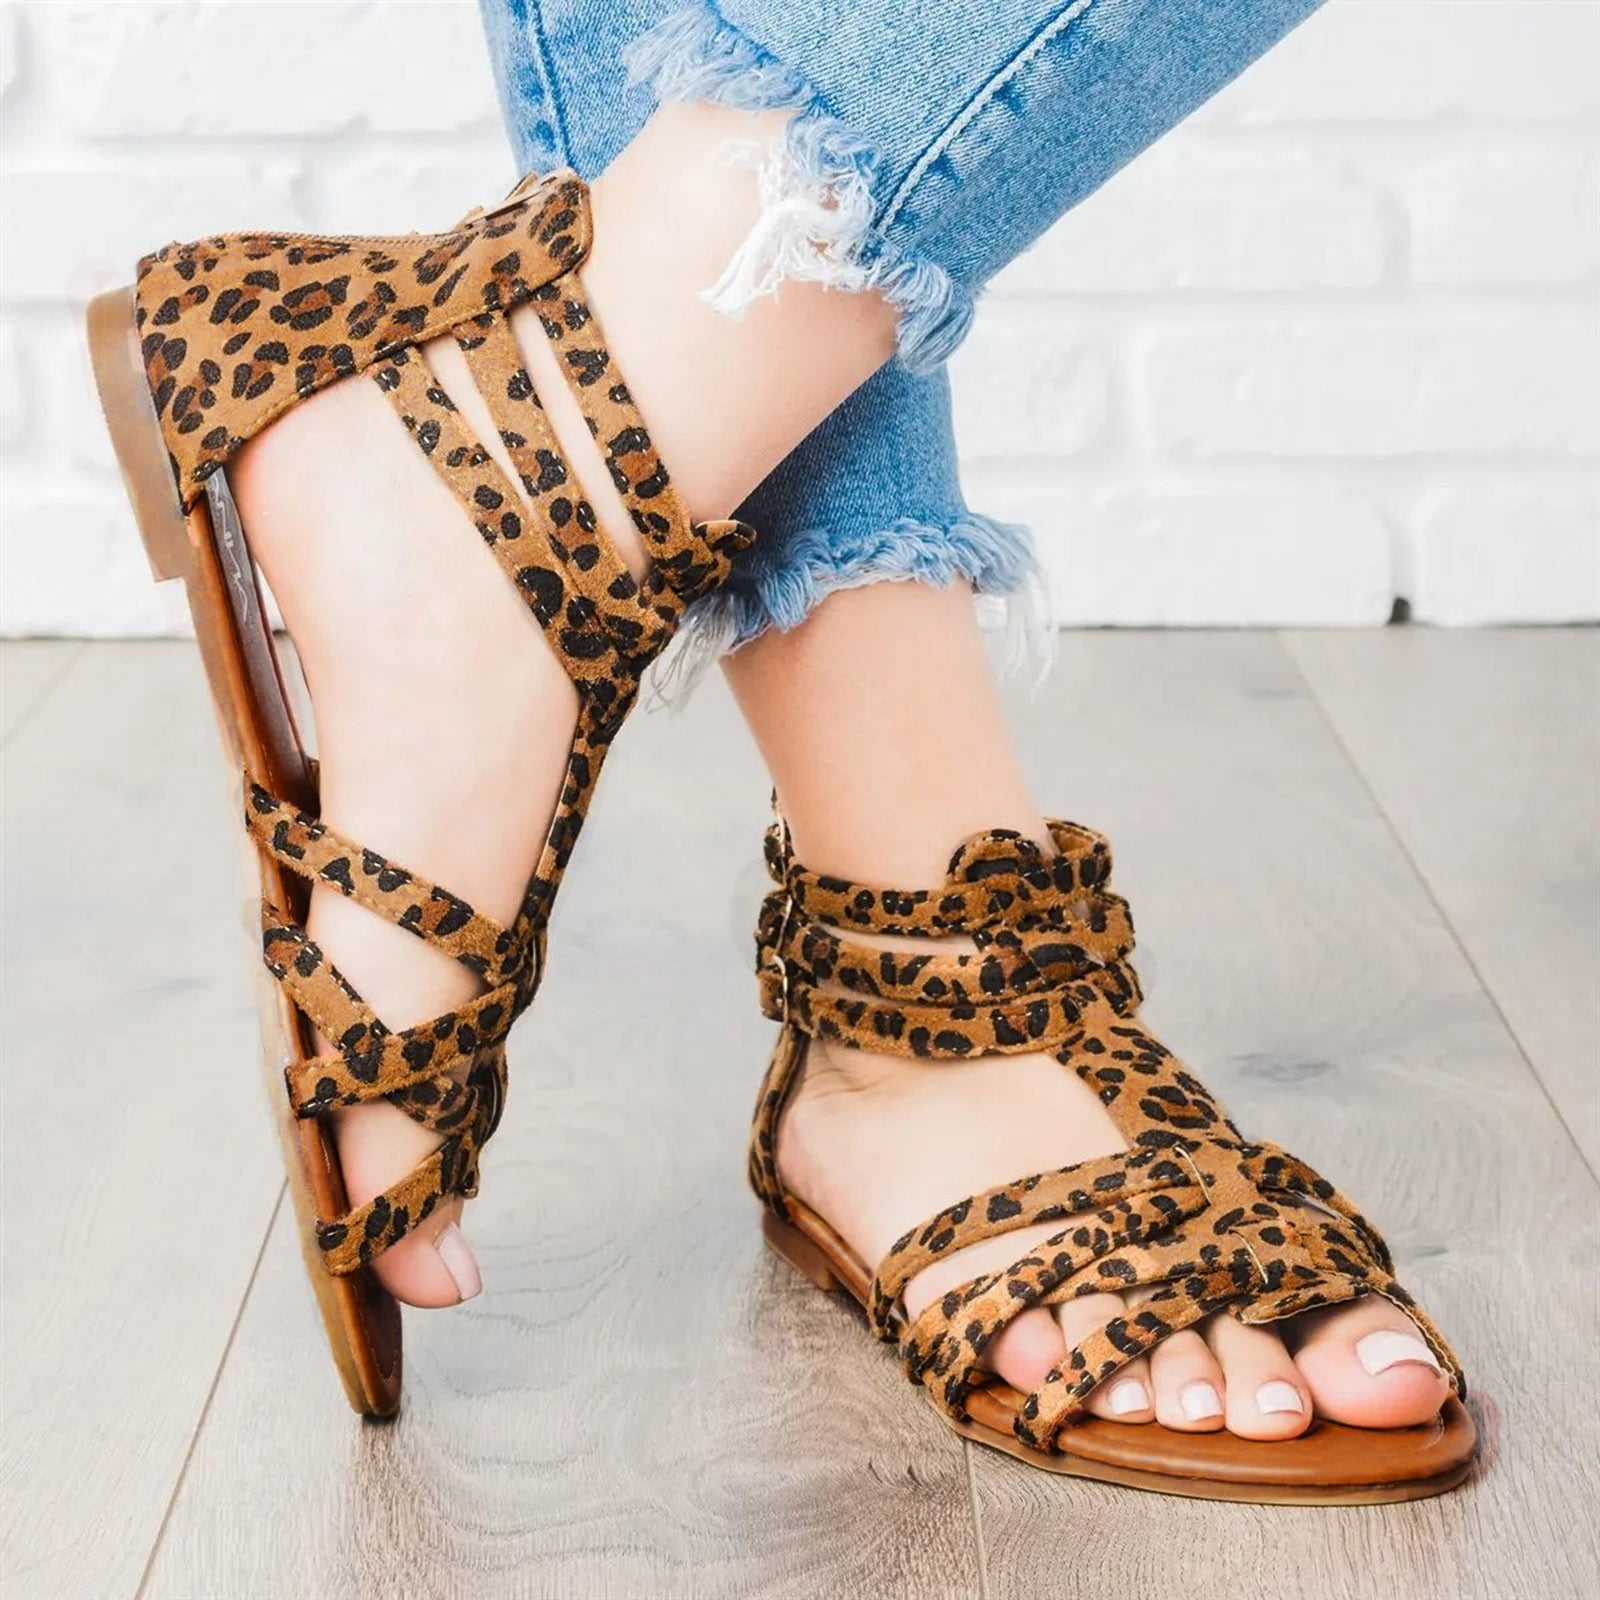 Leopard Print Bowknot Flat Sandals For Women For Women Flat Lace Up Shoes  For Summer Beach And Outdoor Fashion Y2302 From Misihan06, $12.54 |  DHgate.Com